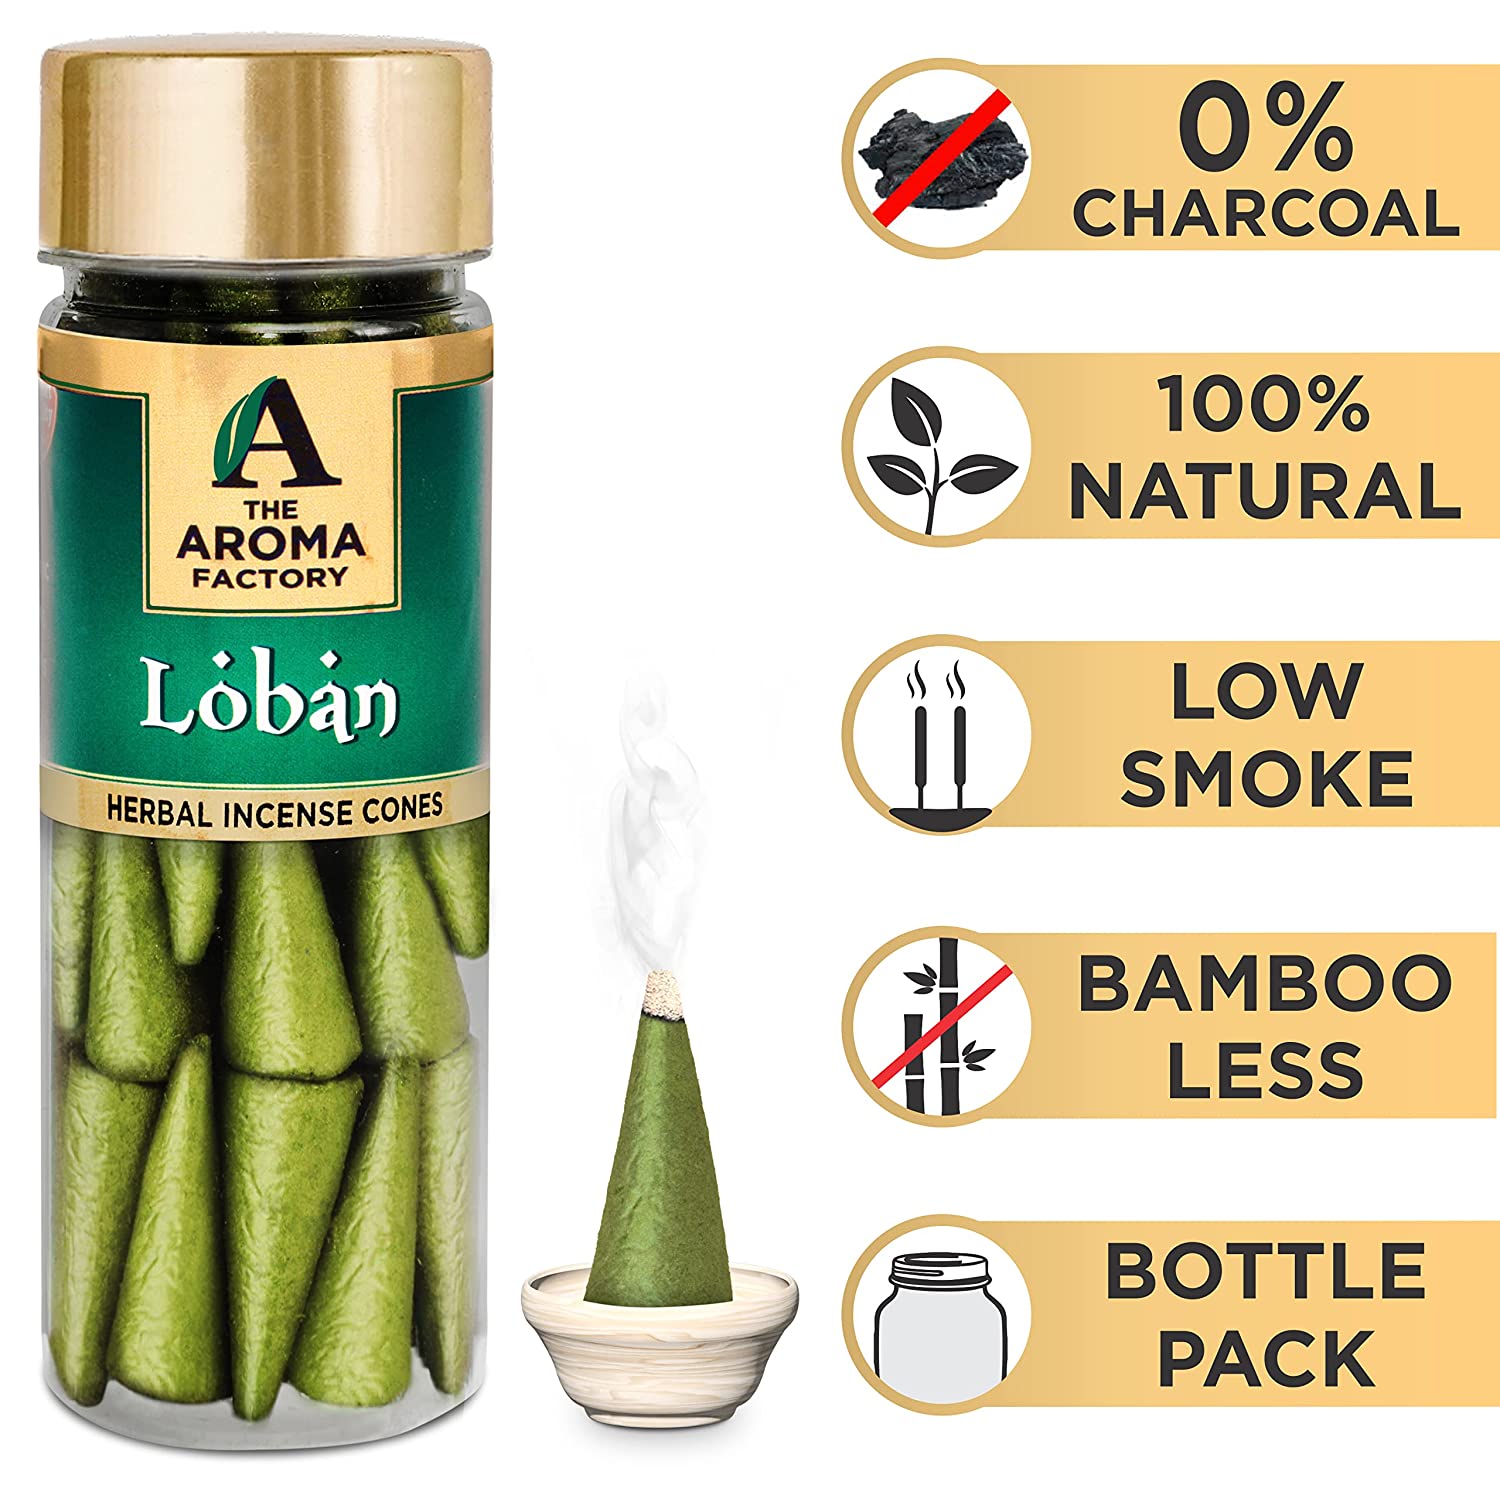 The Aroma Factory Incense Dhoop Cone for Puja, Loban (100% Herbal & 0% Charcoal) 1 Bottle x 30 Cones